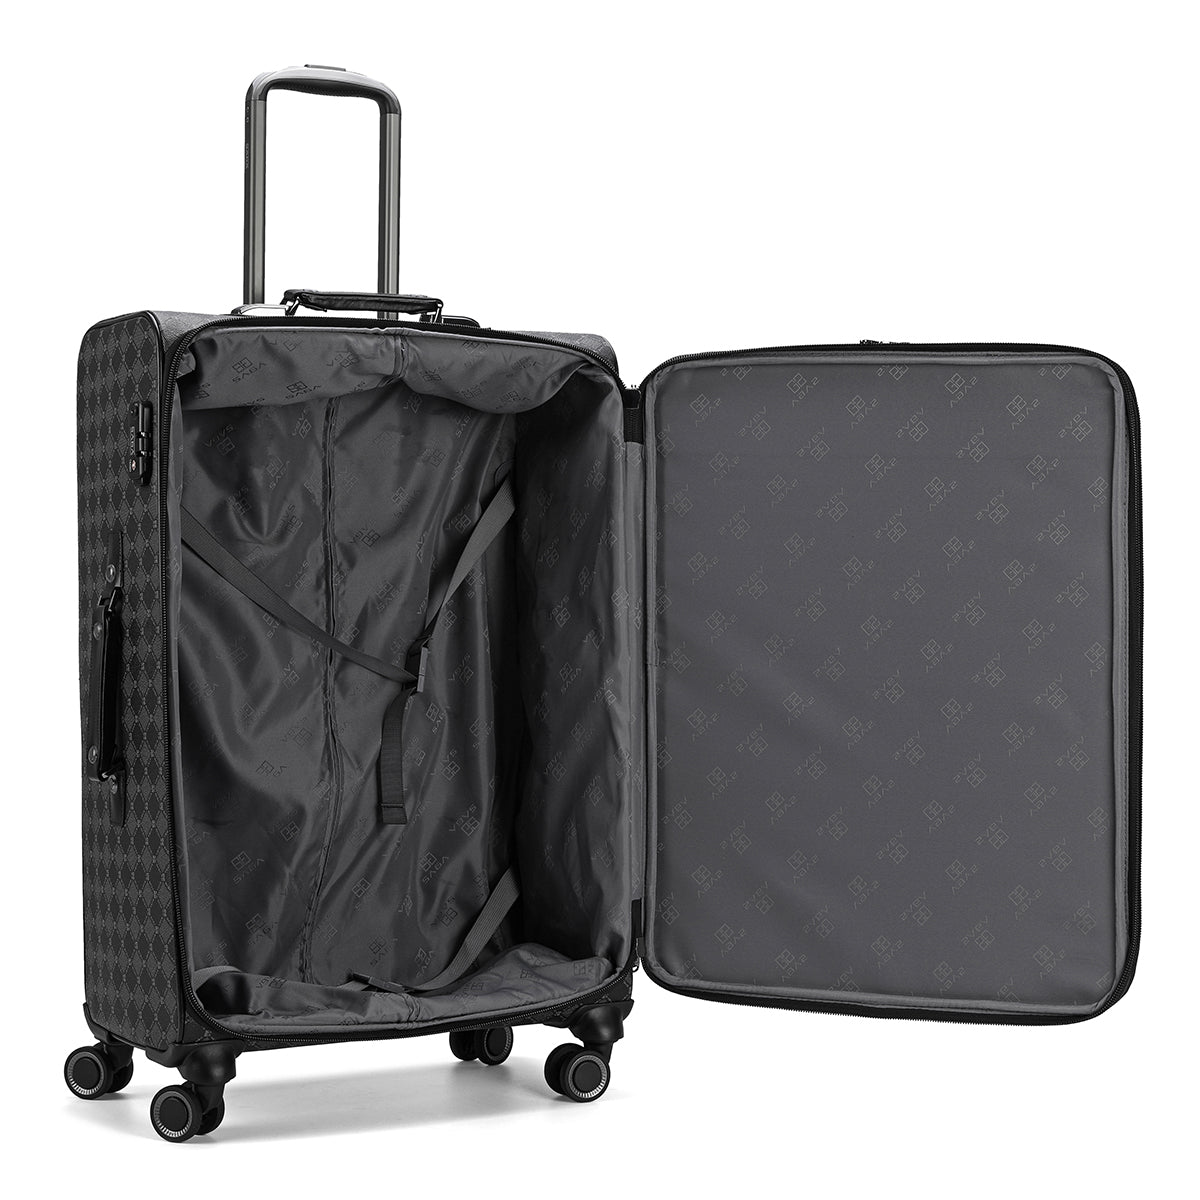 Luxury travel bags with high durability, available in several sizes, gray colour